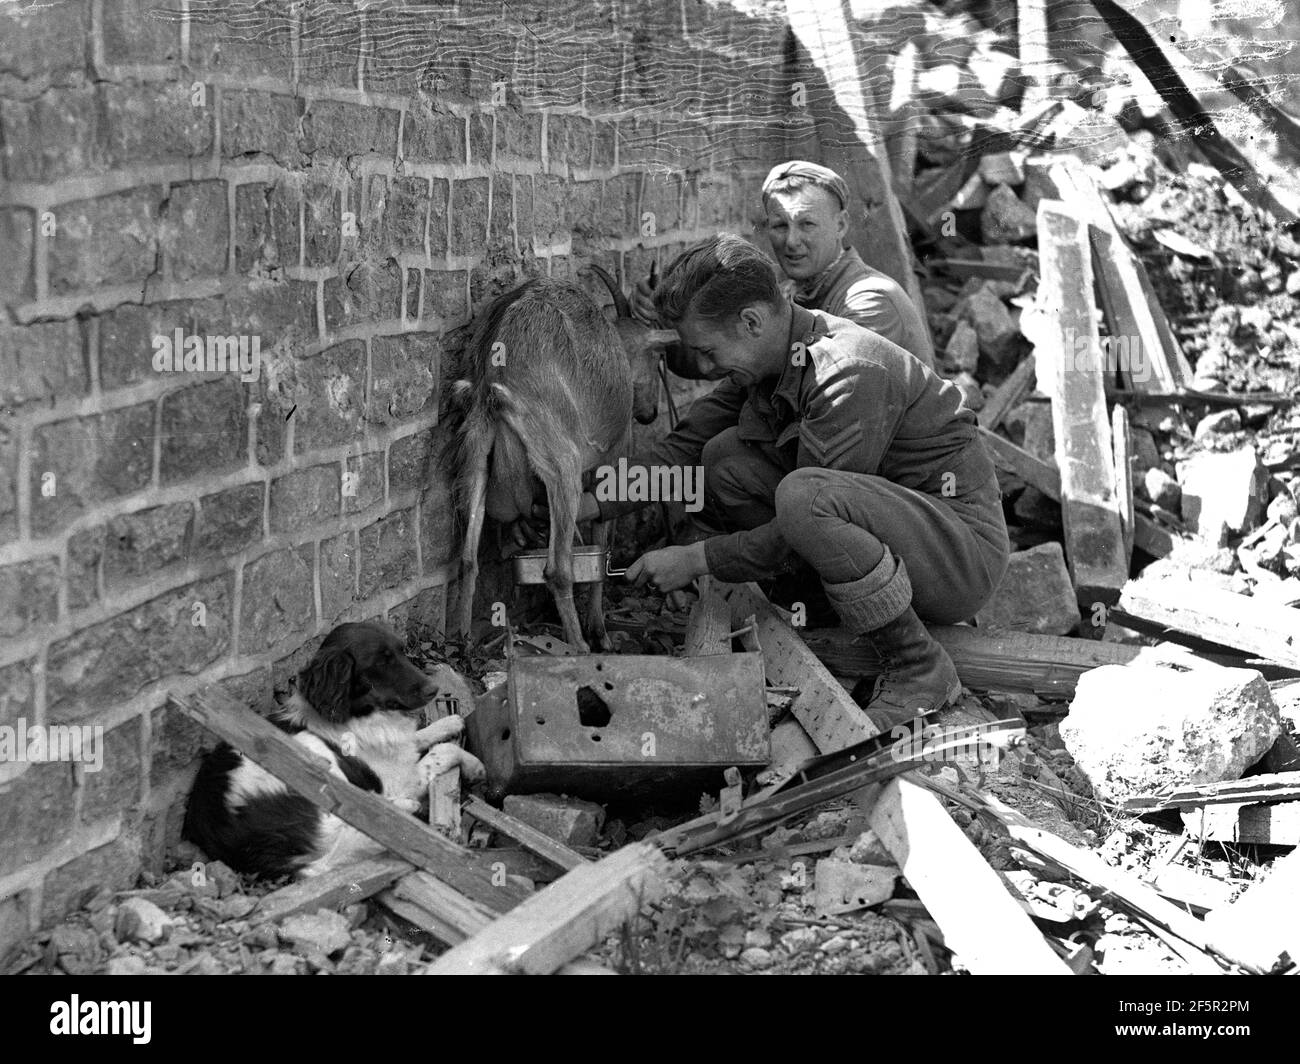 Allied Soldiers milking a goat amongst bombed damaged building during World War Two animals war zone frightened scared ruins rubble Stock Photo